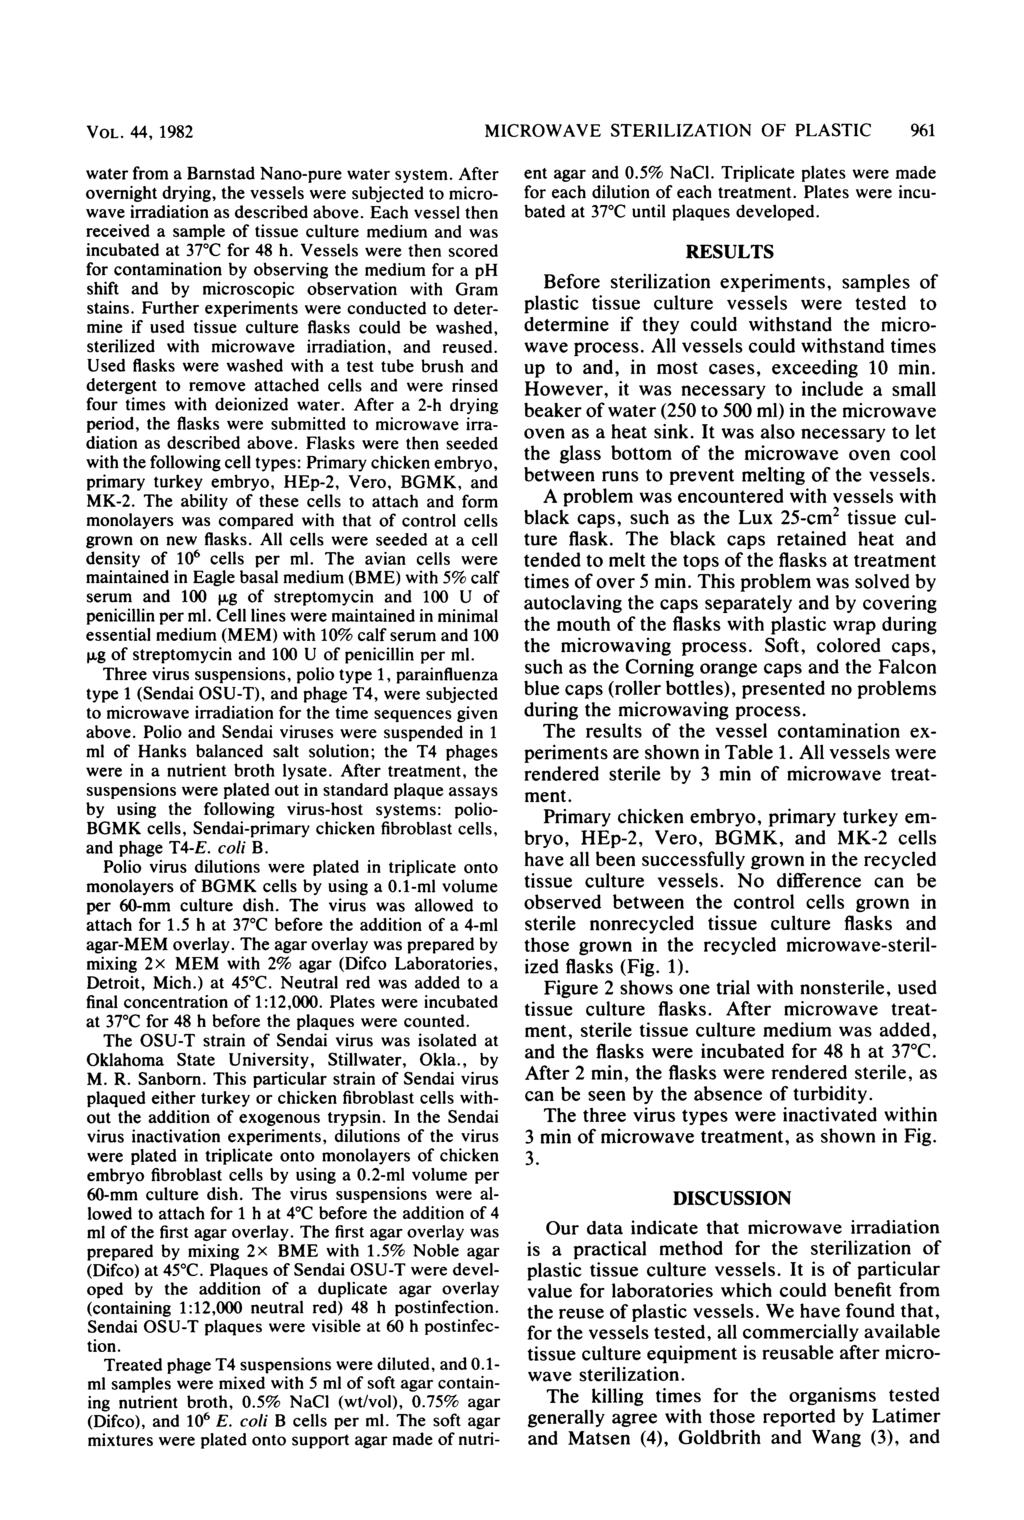 VOL. 44, 1982 MICROWAVE STERILIZATION OF PLASTIC 961 water from a Barnstad Nano-pure water system. After overnight drying, the vessels were subjected to microwave irradiation as described above.